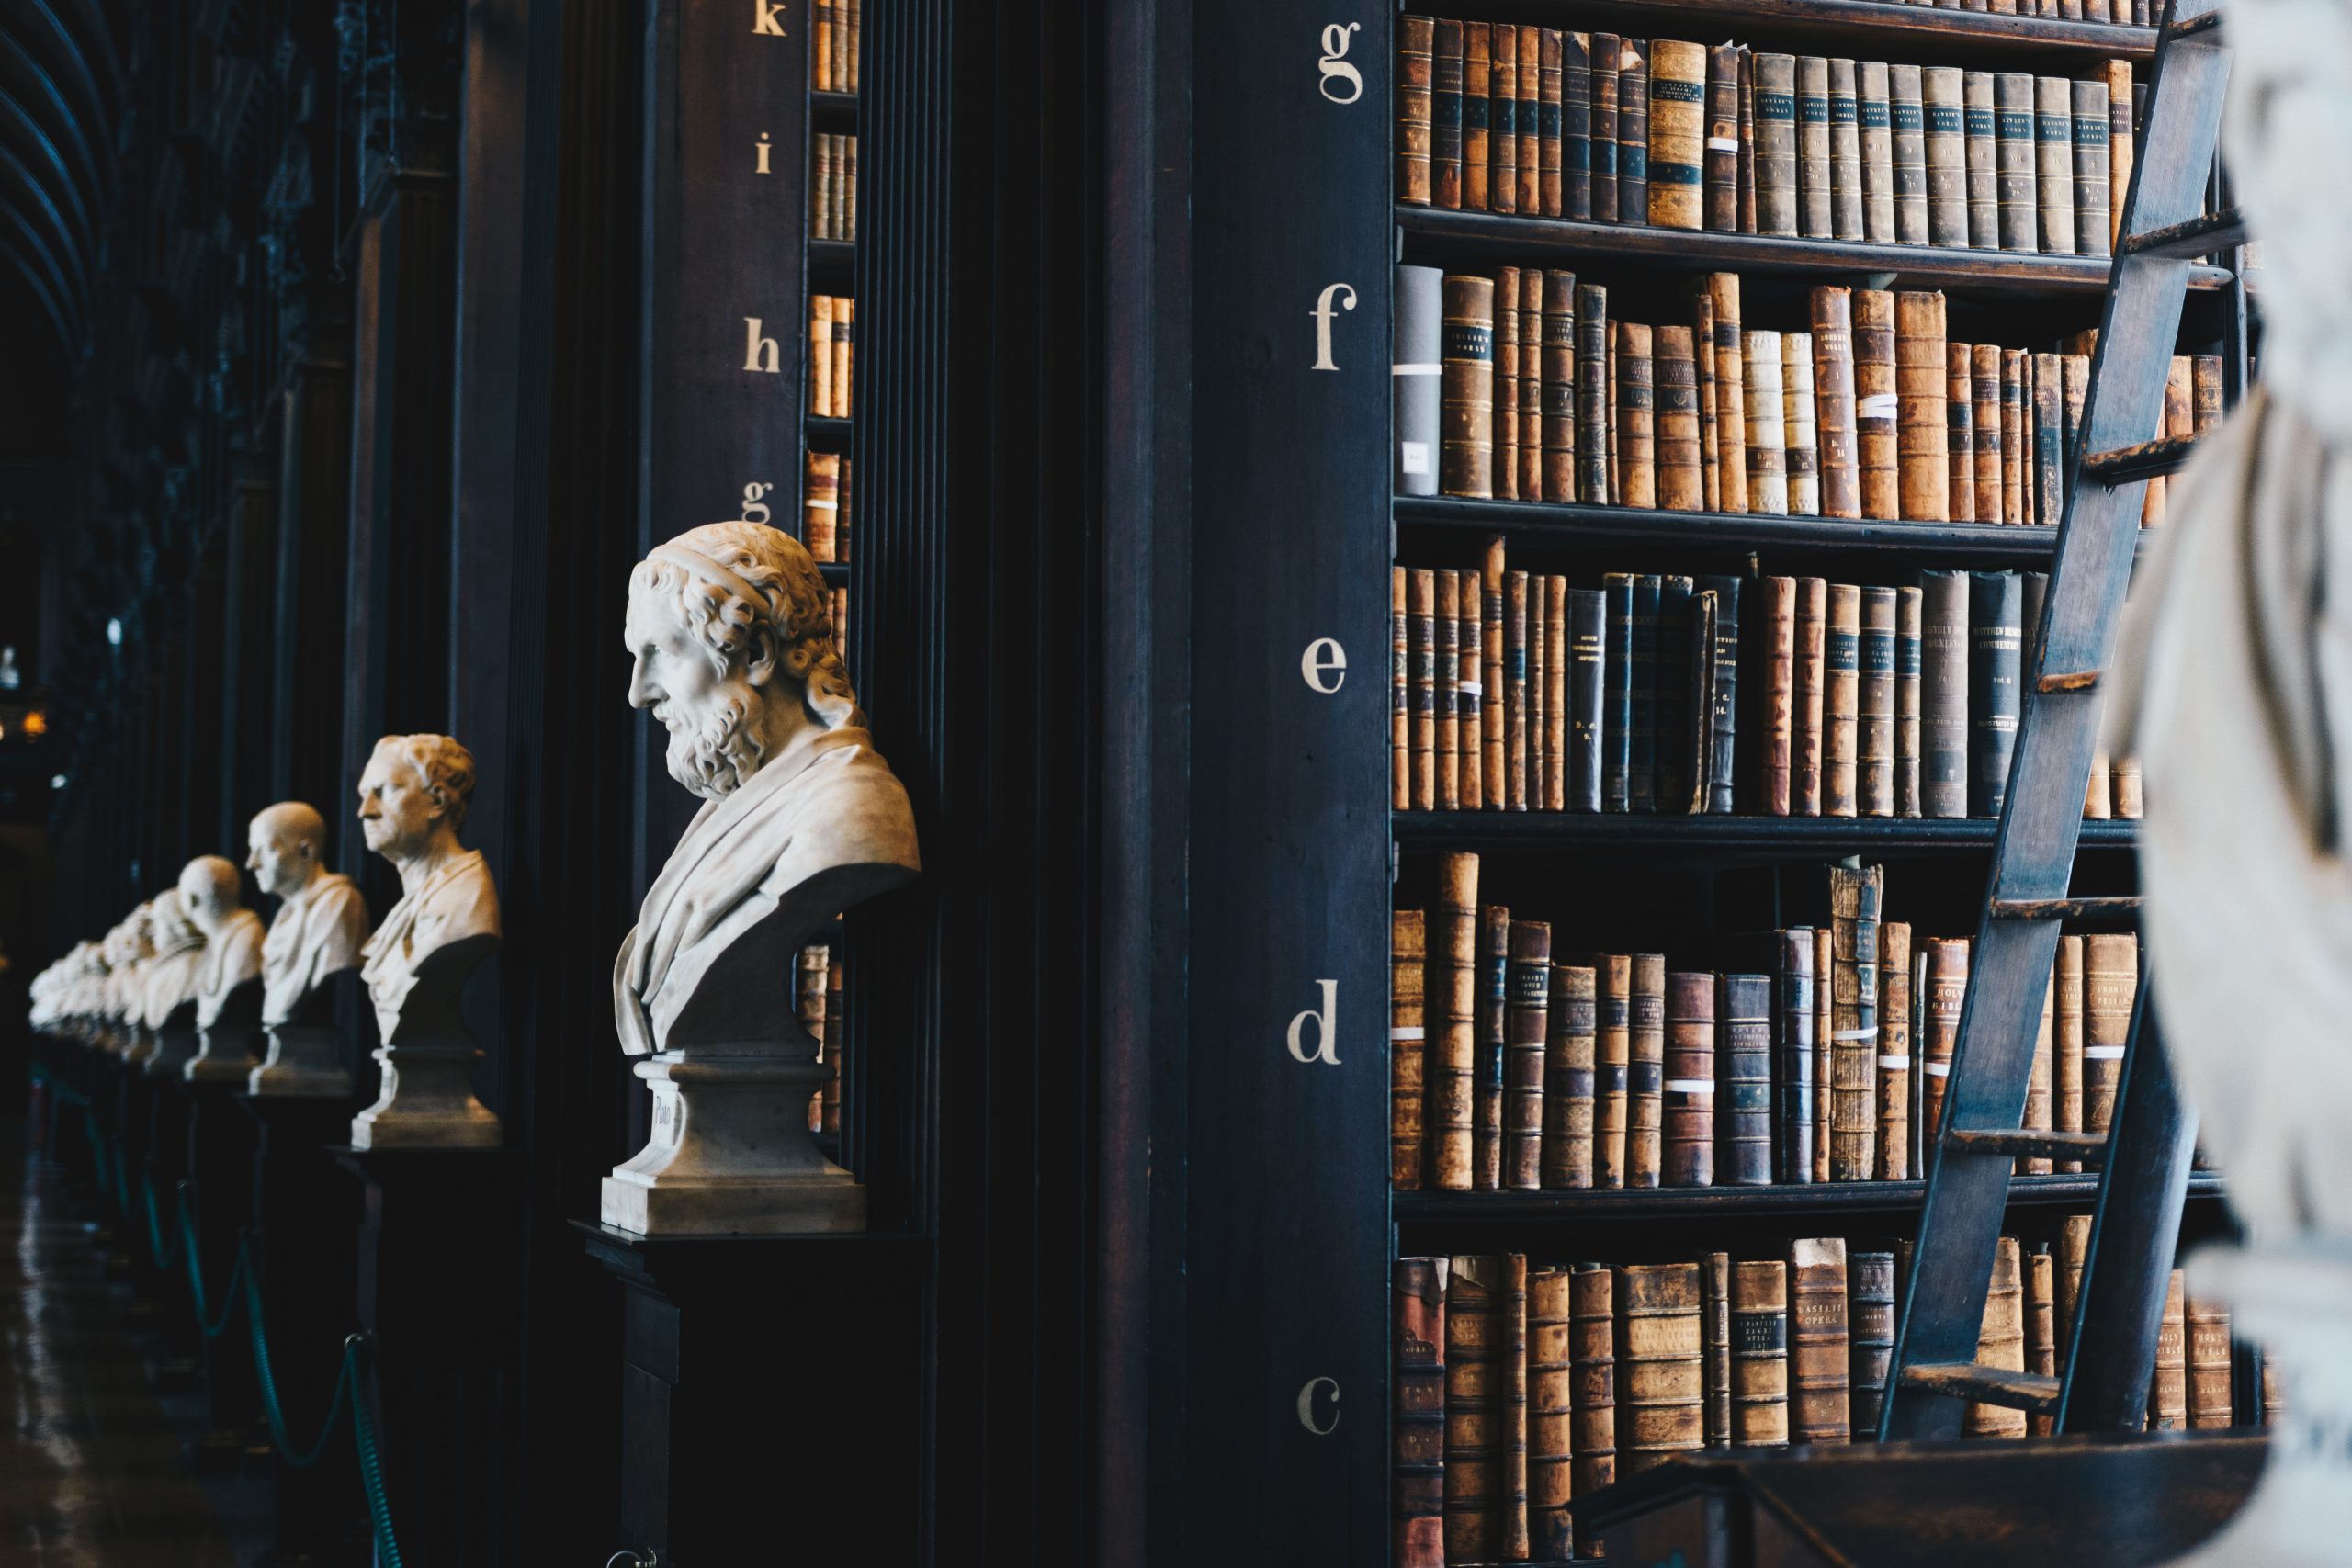 View of a library shelf with old books and bust sculptures of historical figures